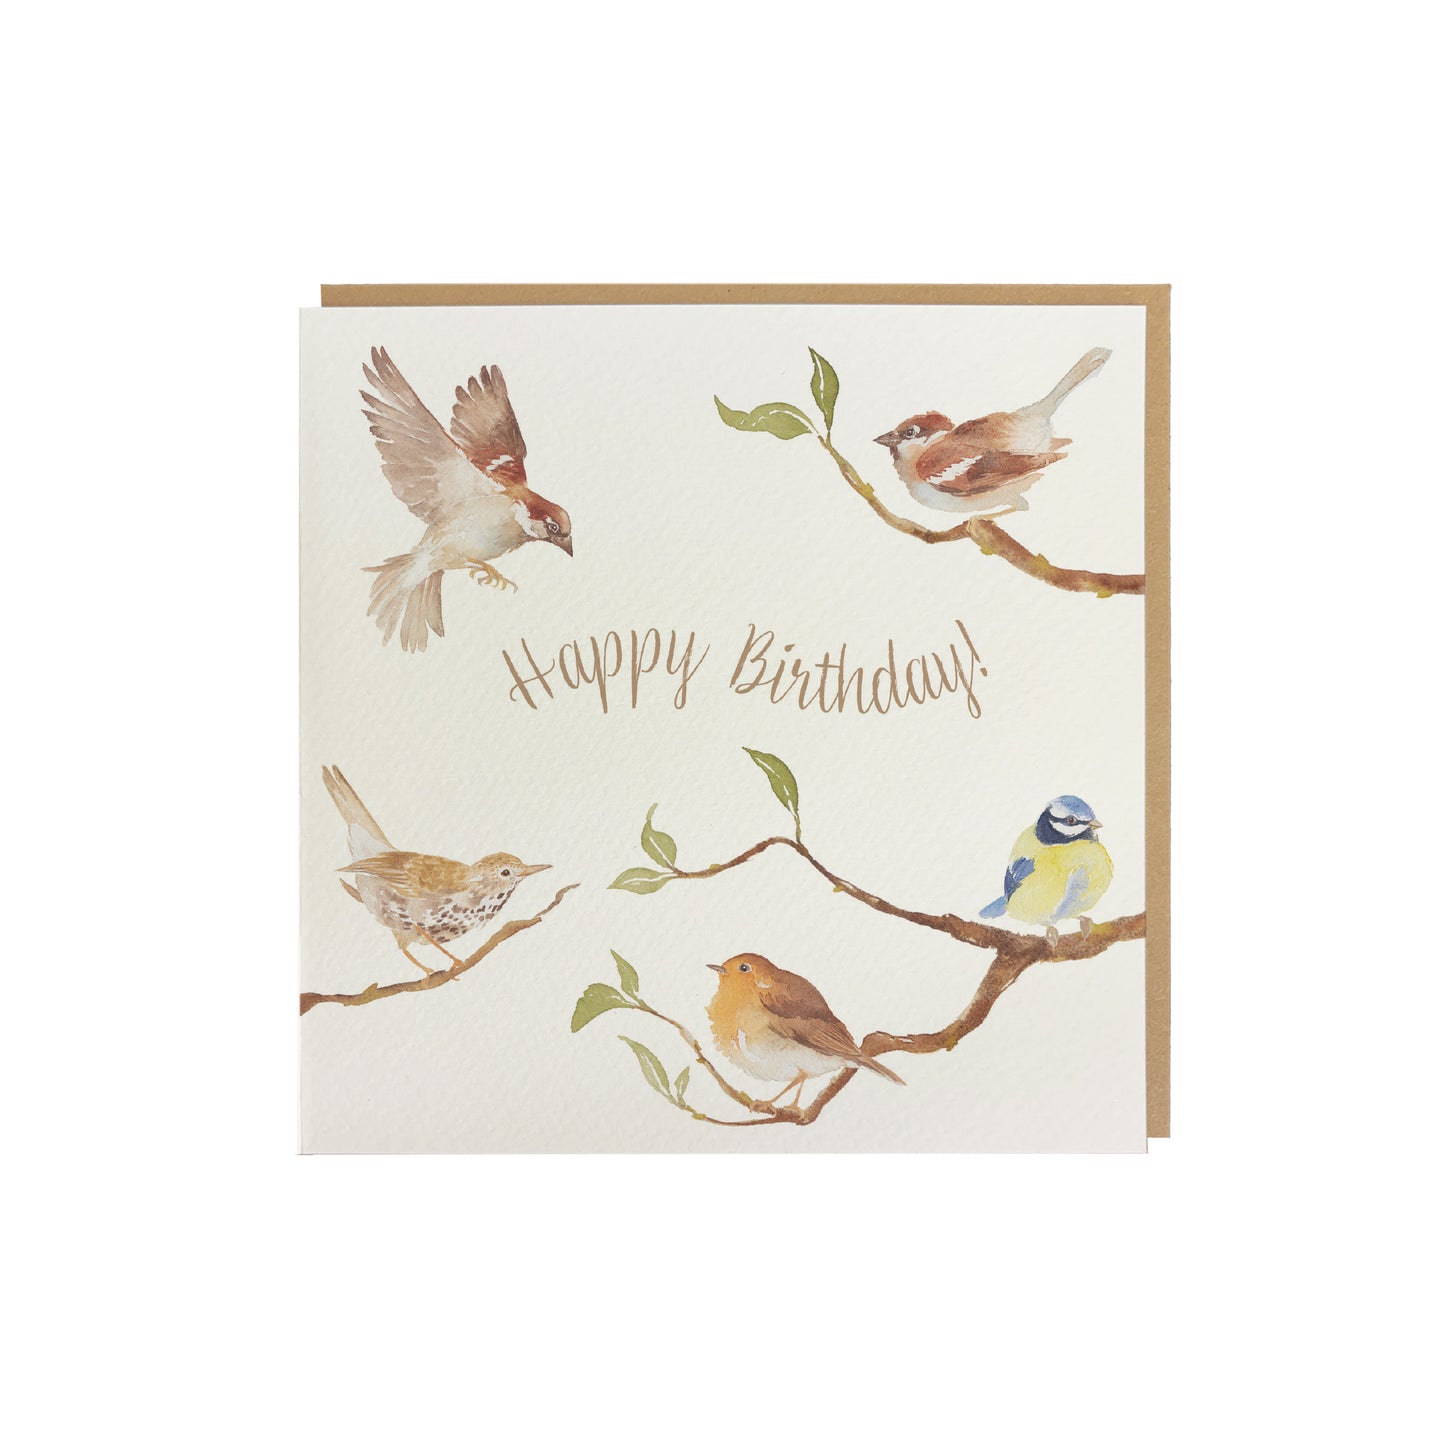 A greetings card reading Happy Birthday in brown text surrounded by garden birds on branches in a watercolour style. The card has a recyclable brown kraft envelope behind it.